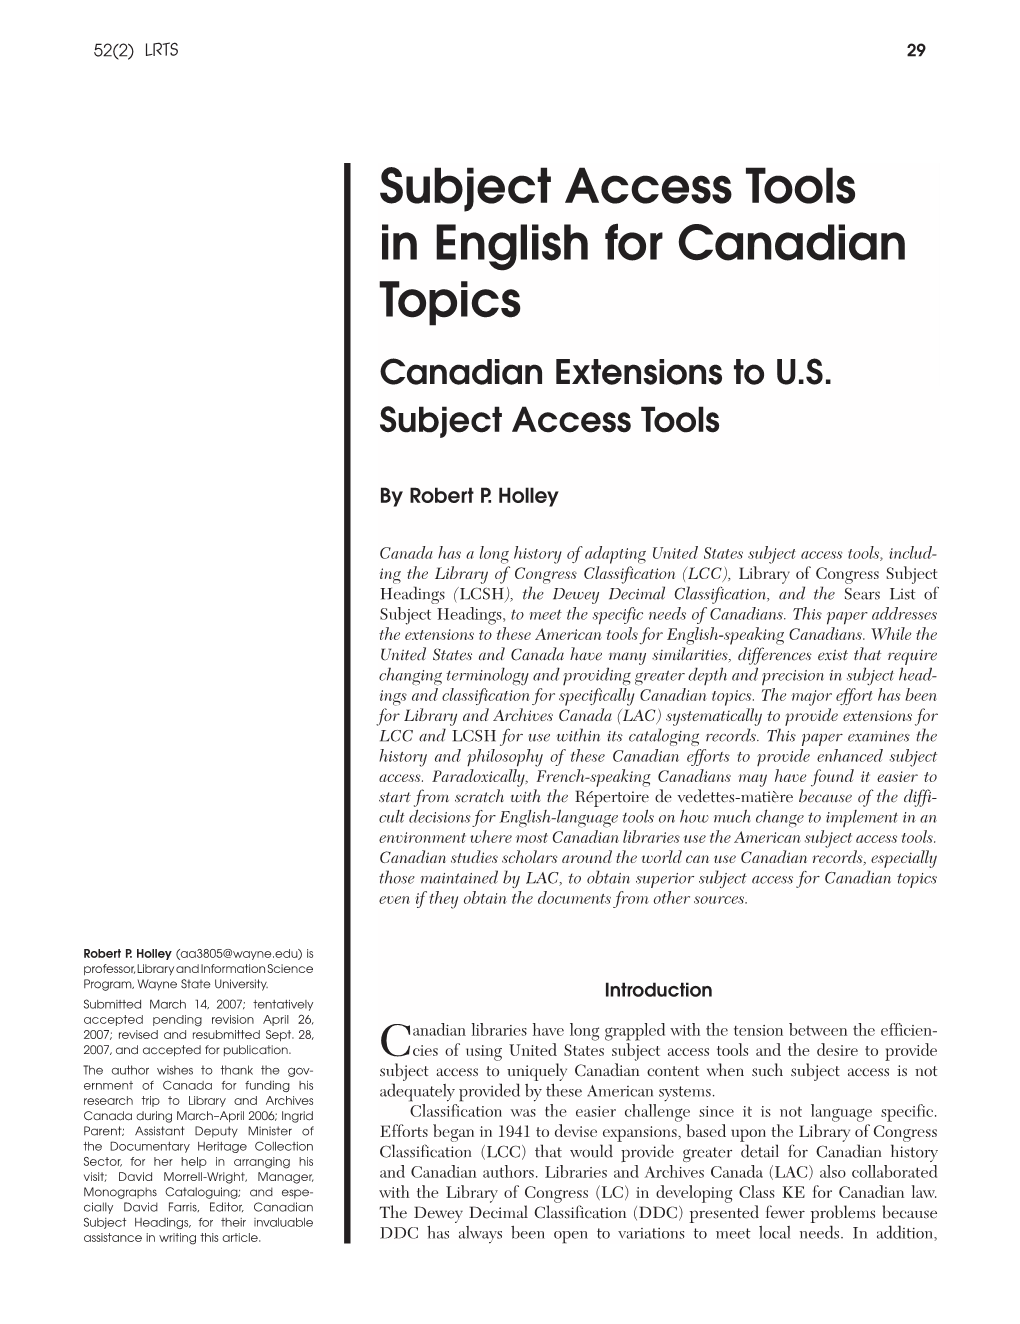 Subject Access Tools in English for Canadian Topics Canadian Extensions to U.S